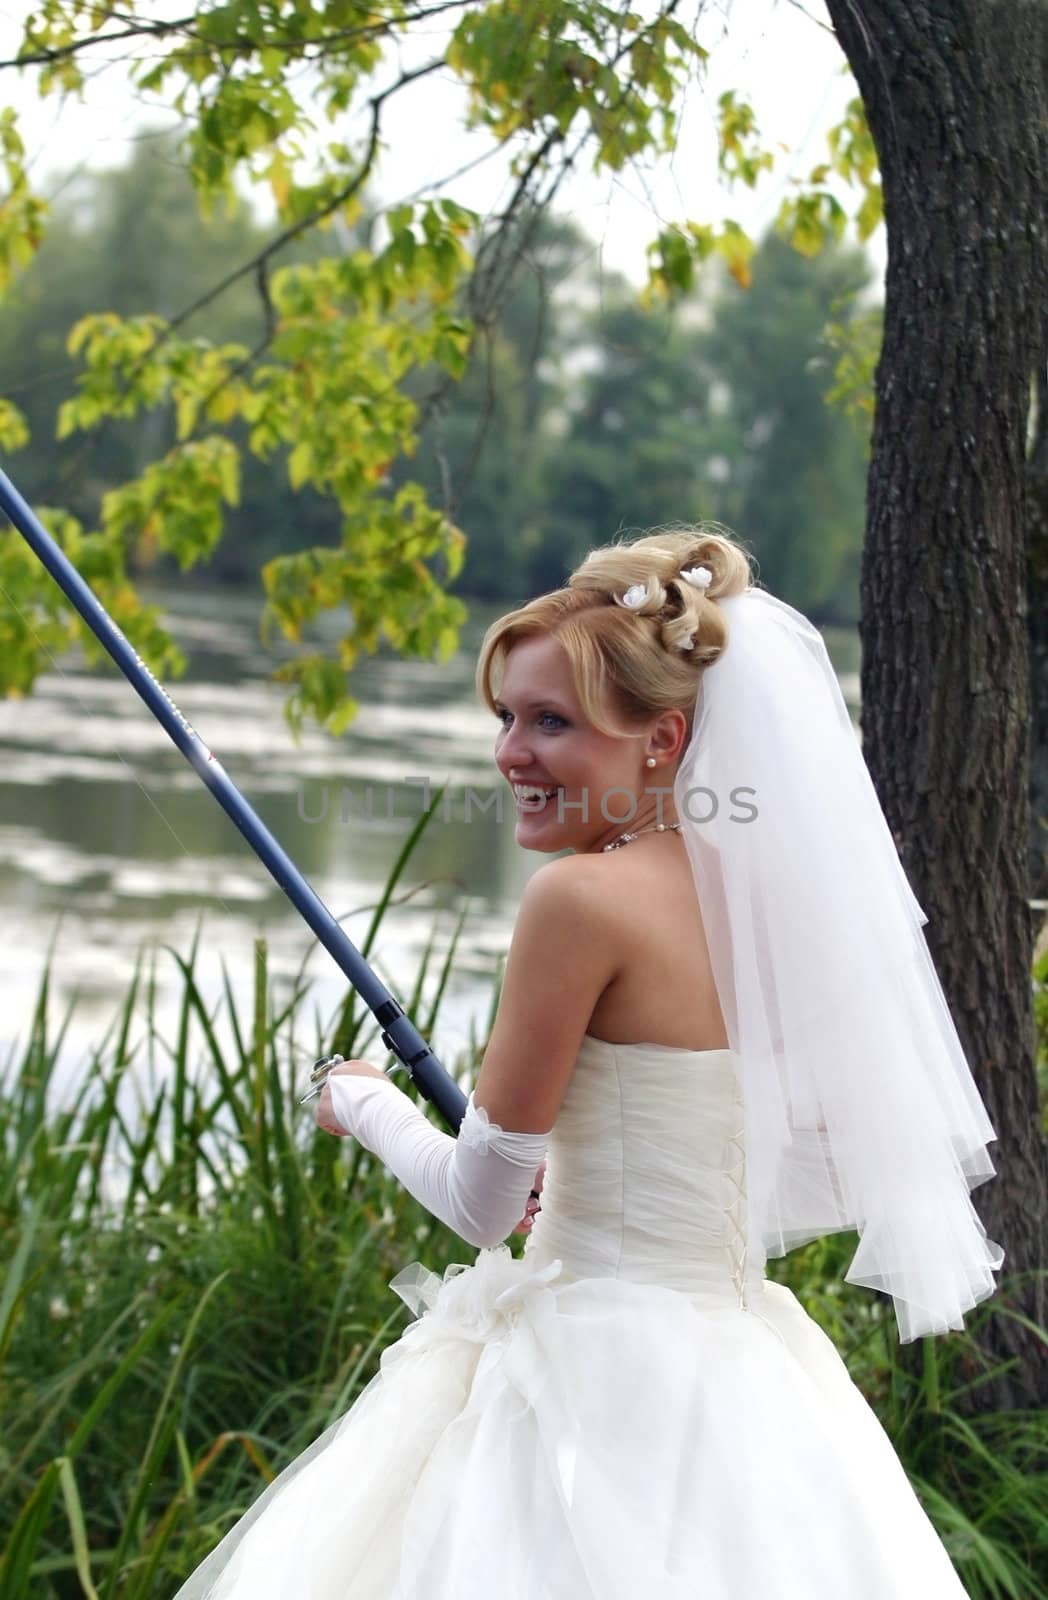 The beautiful bride with fishing tackle